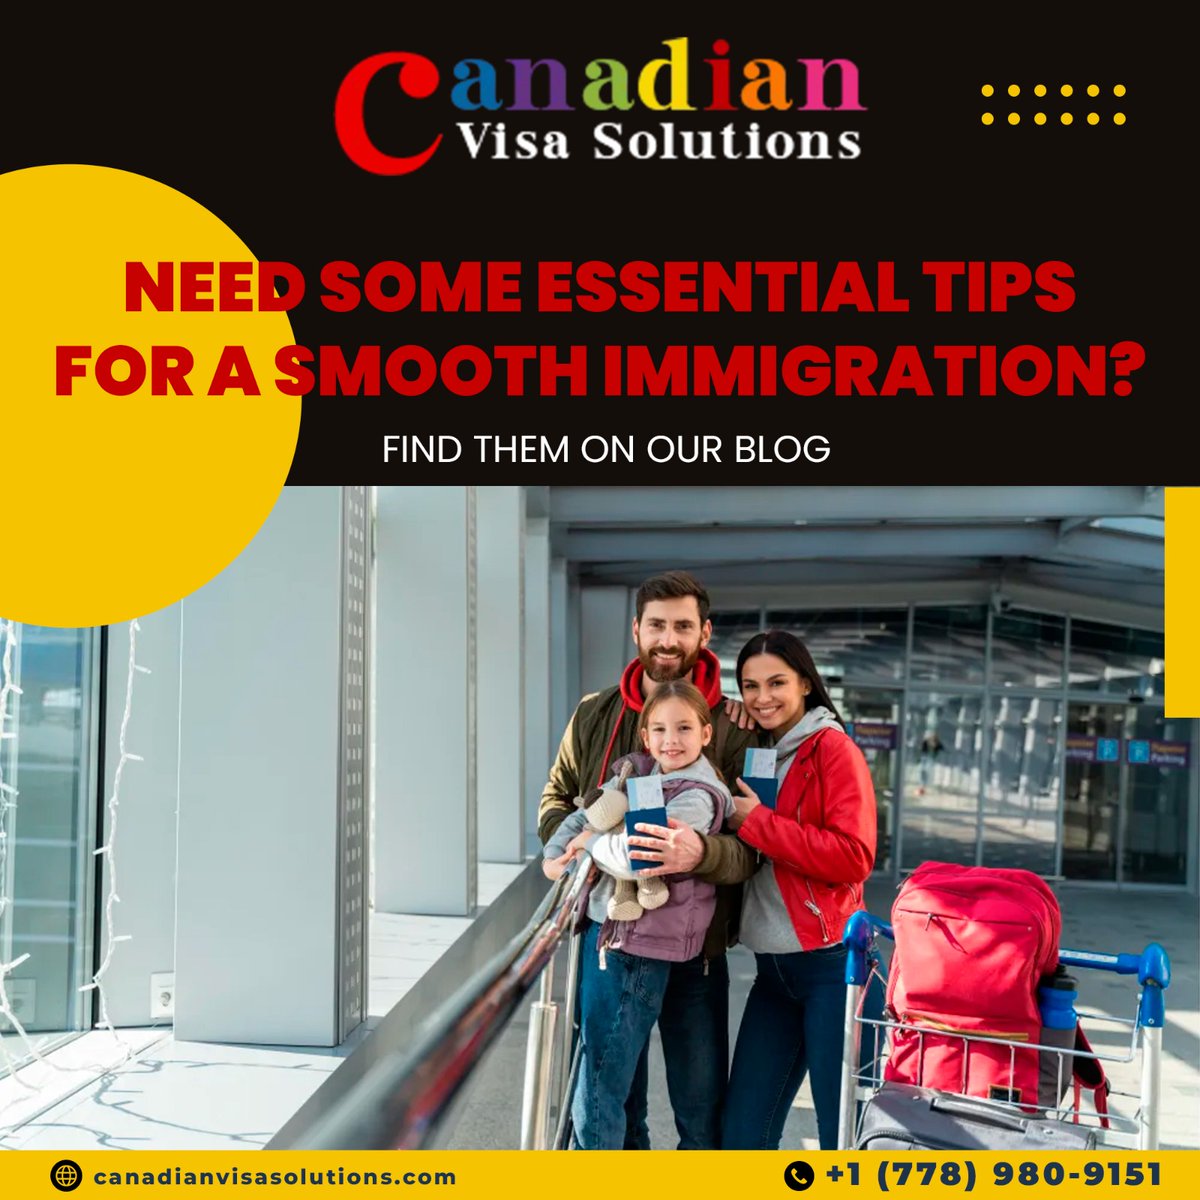 Considering studying in Canada? Read our blog post to learn more about the Canadian education system.
innovationimmigration.com/navigating-can…
#canadianeducation #educationcanada #studyincanada #schoolincanada #canadianuniversity #canadiancollege #workincanada #student  #studyabroad